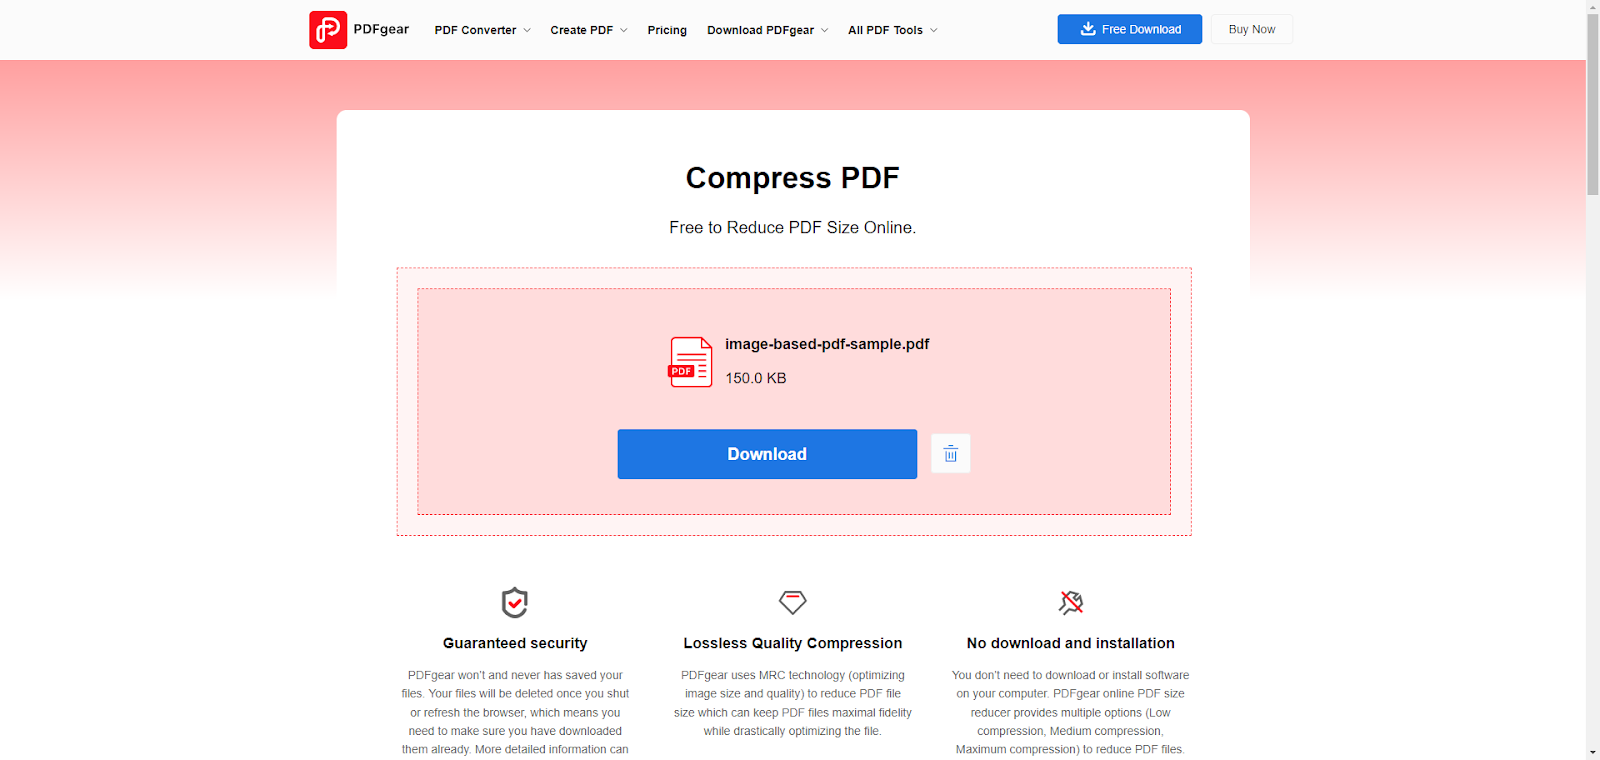 Download the compressed pdf